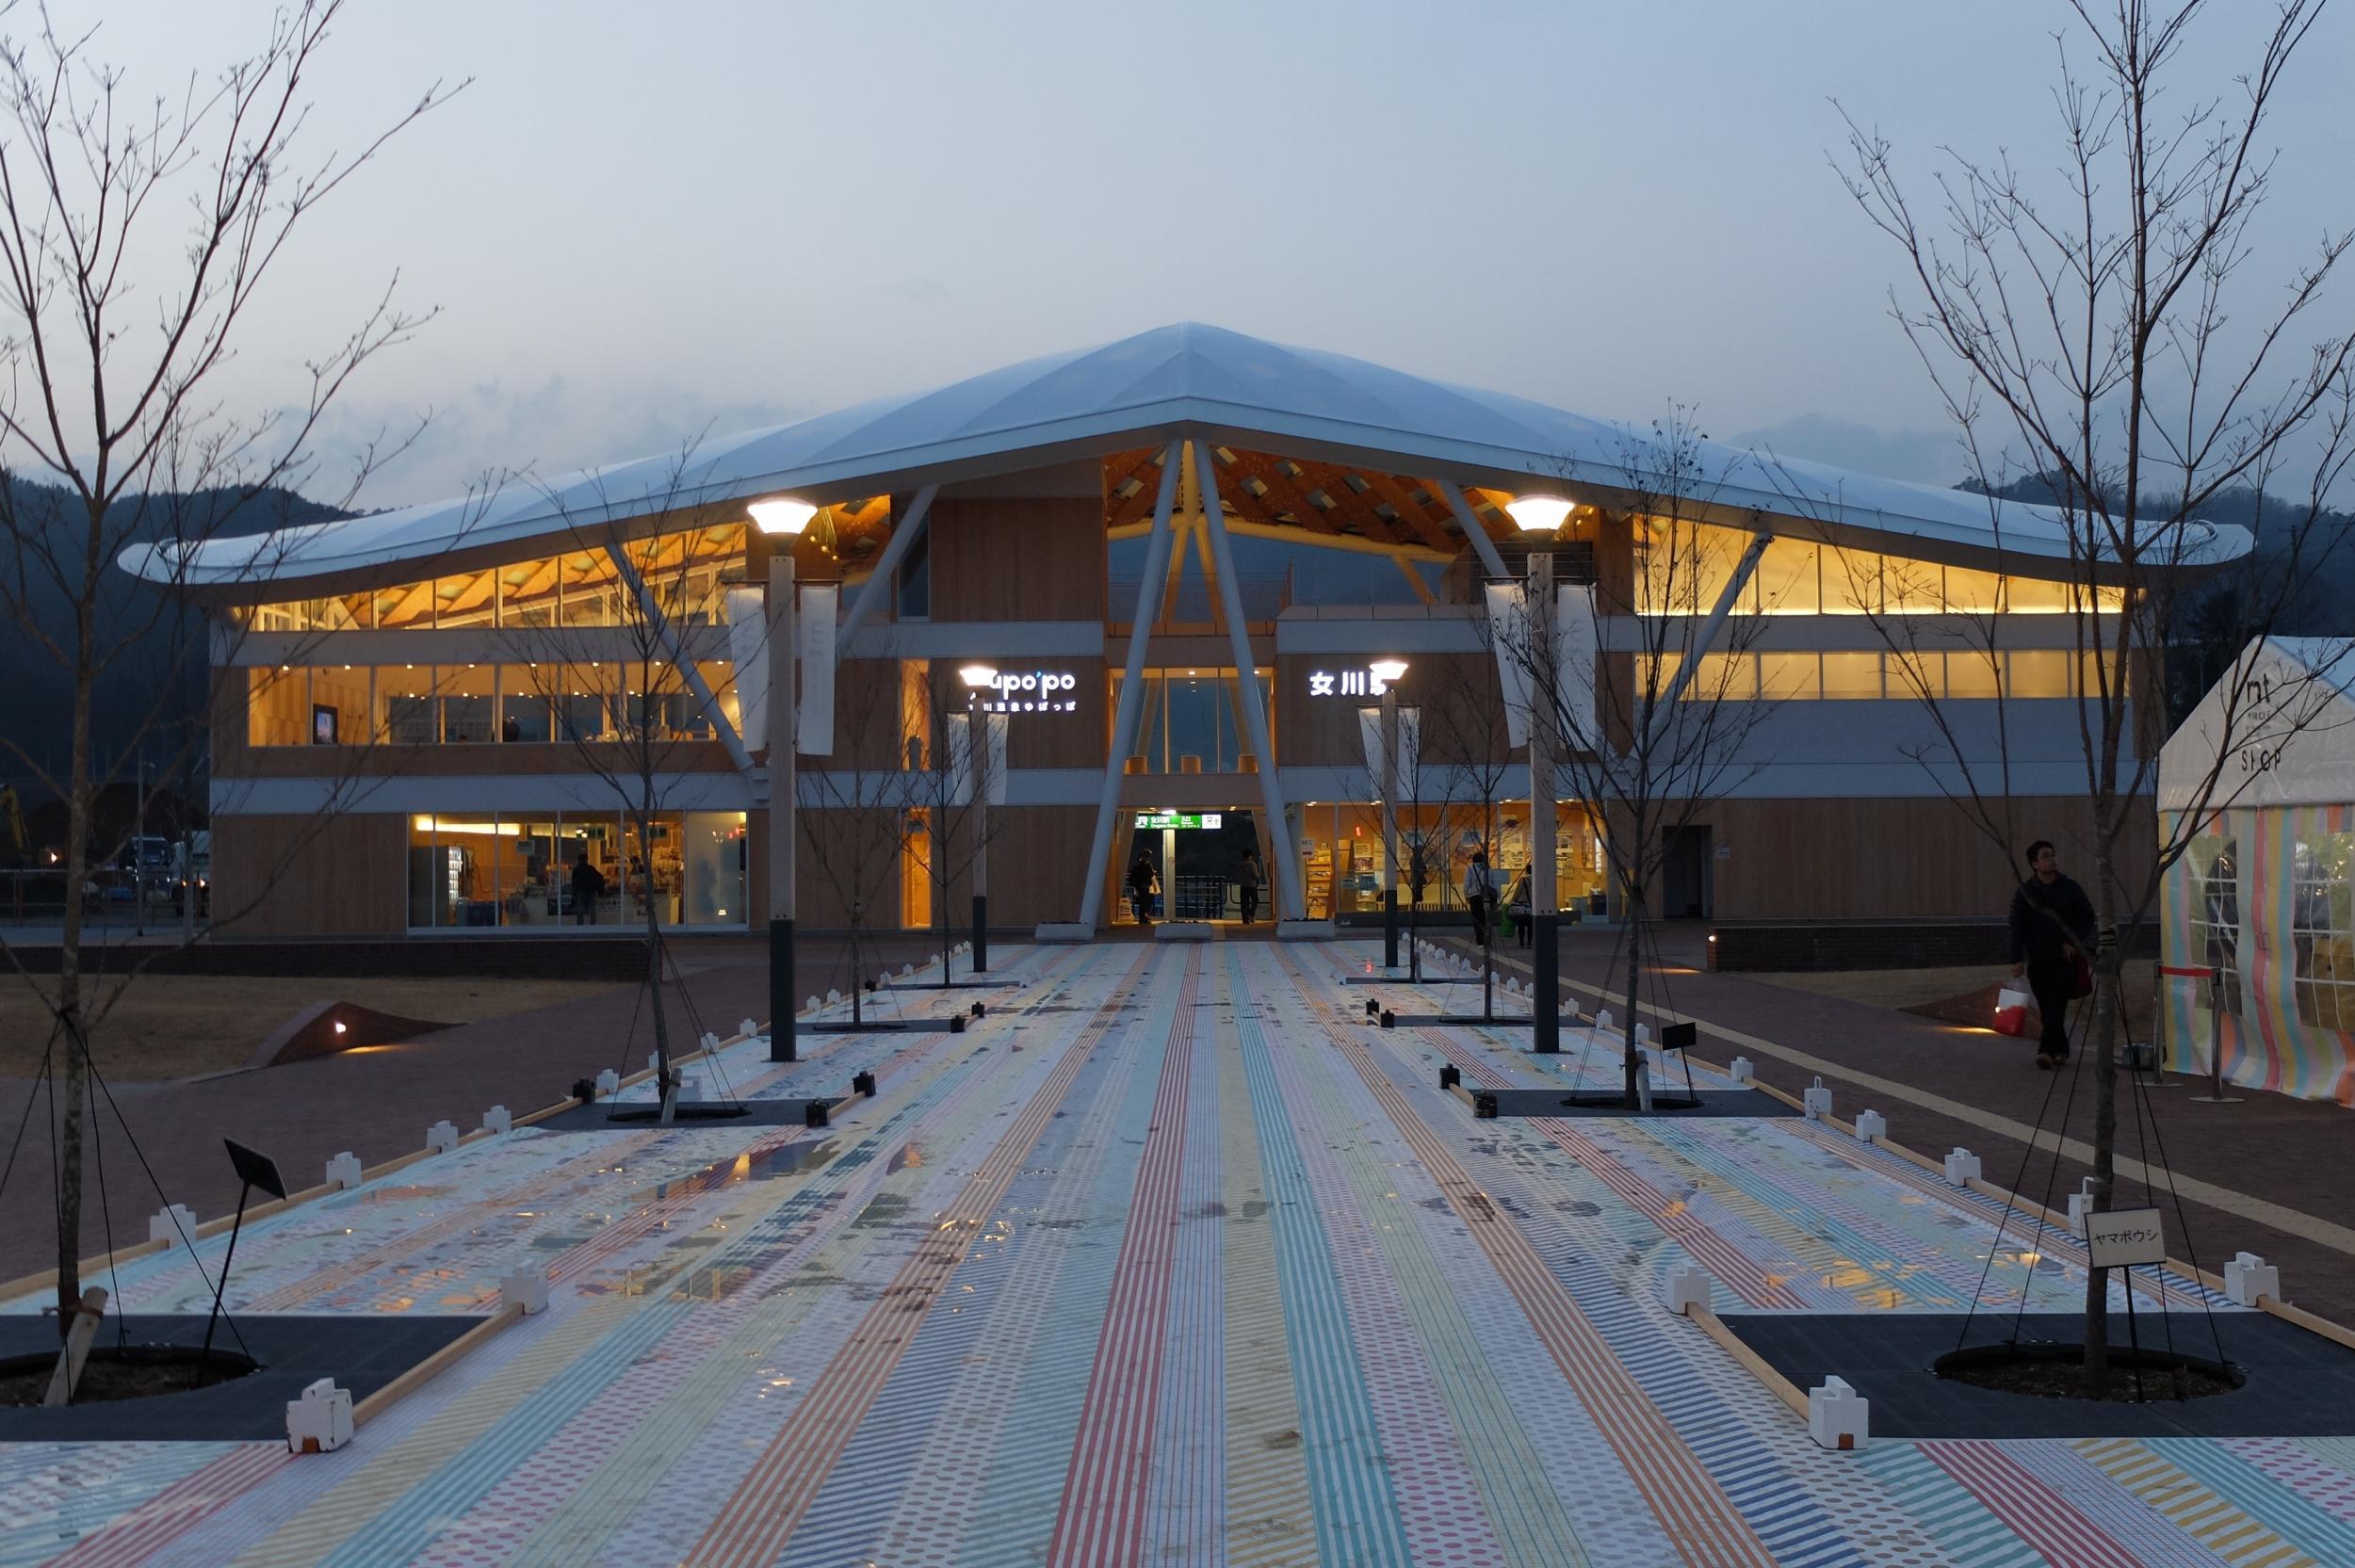 A modern train station is part of the new Onagawa landscape